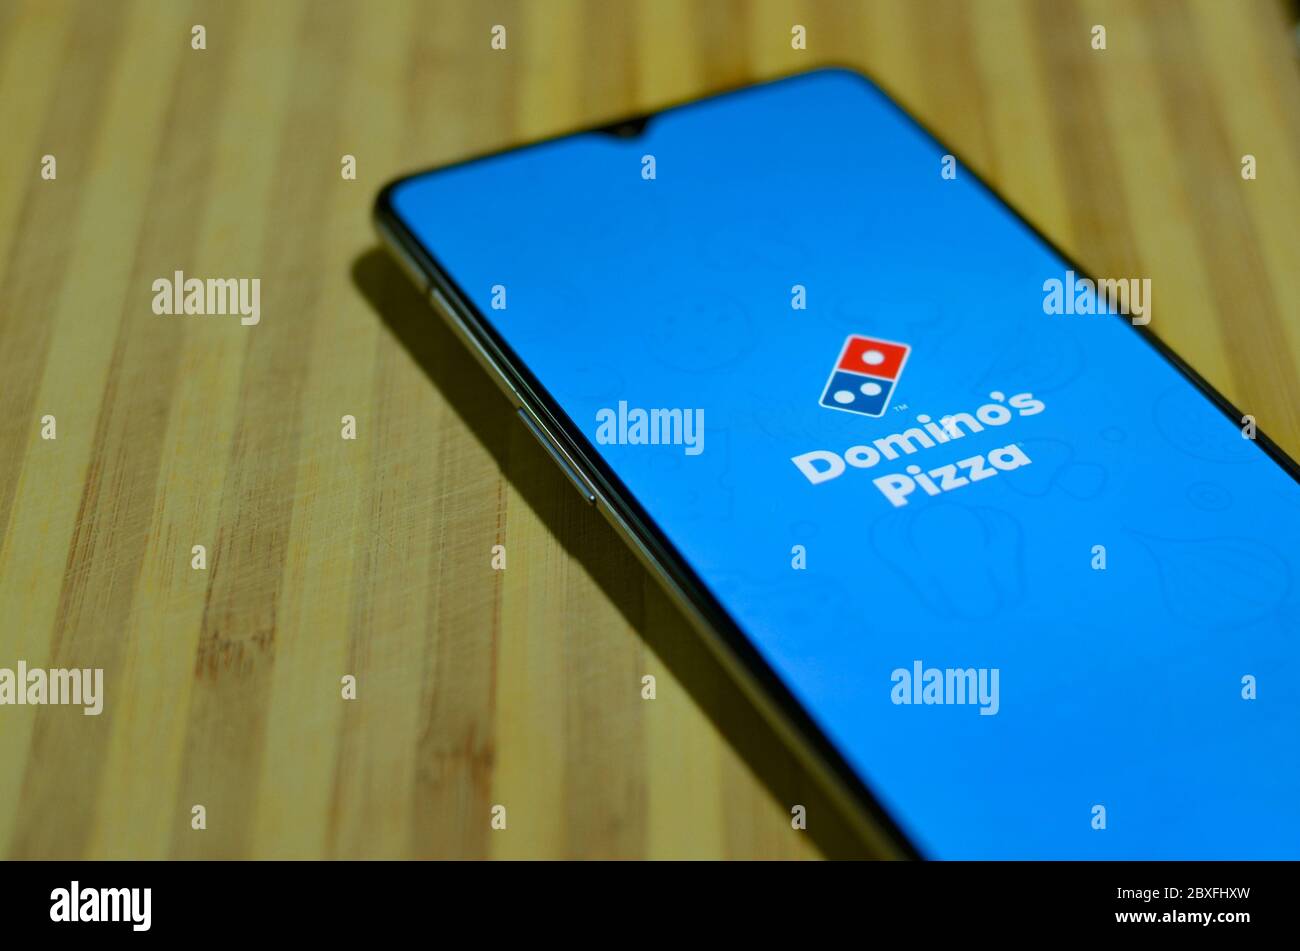 New Delhi, India, 2020. Flat lay mobile phone showing Domino's pizza delivery mobile app during on a wooden board background. Delivery of food is allo Stock Photo